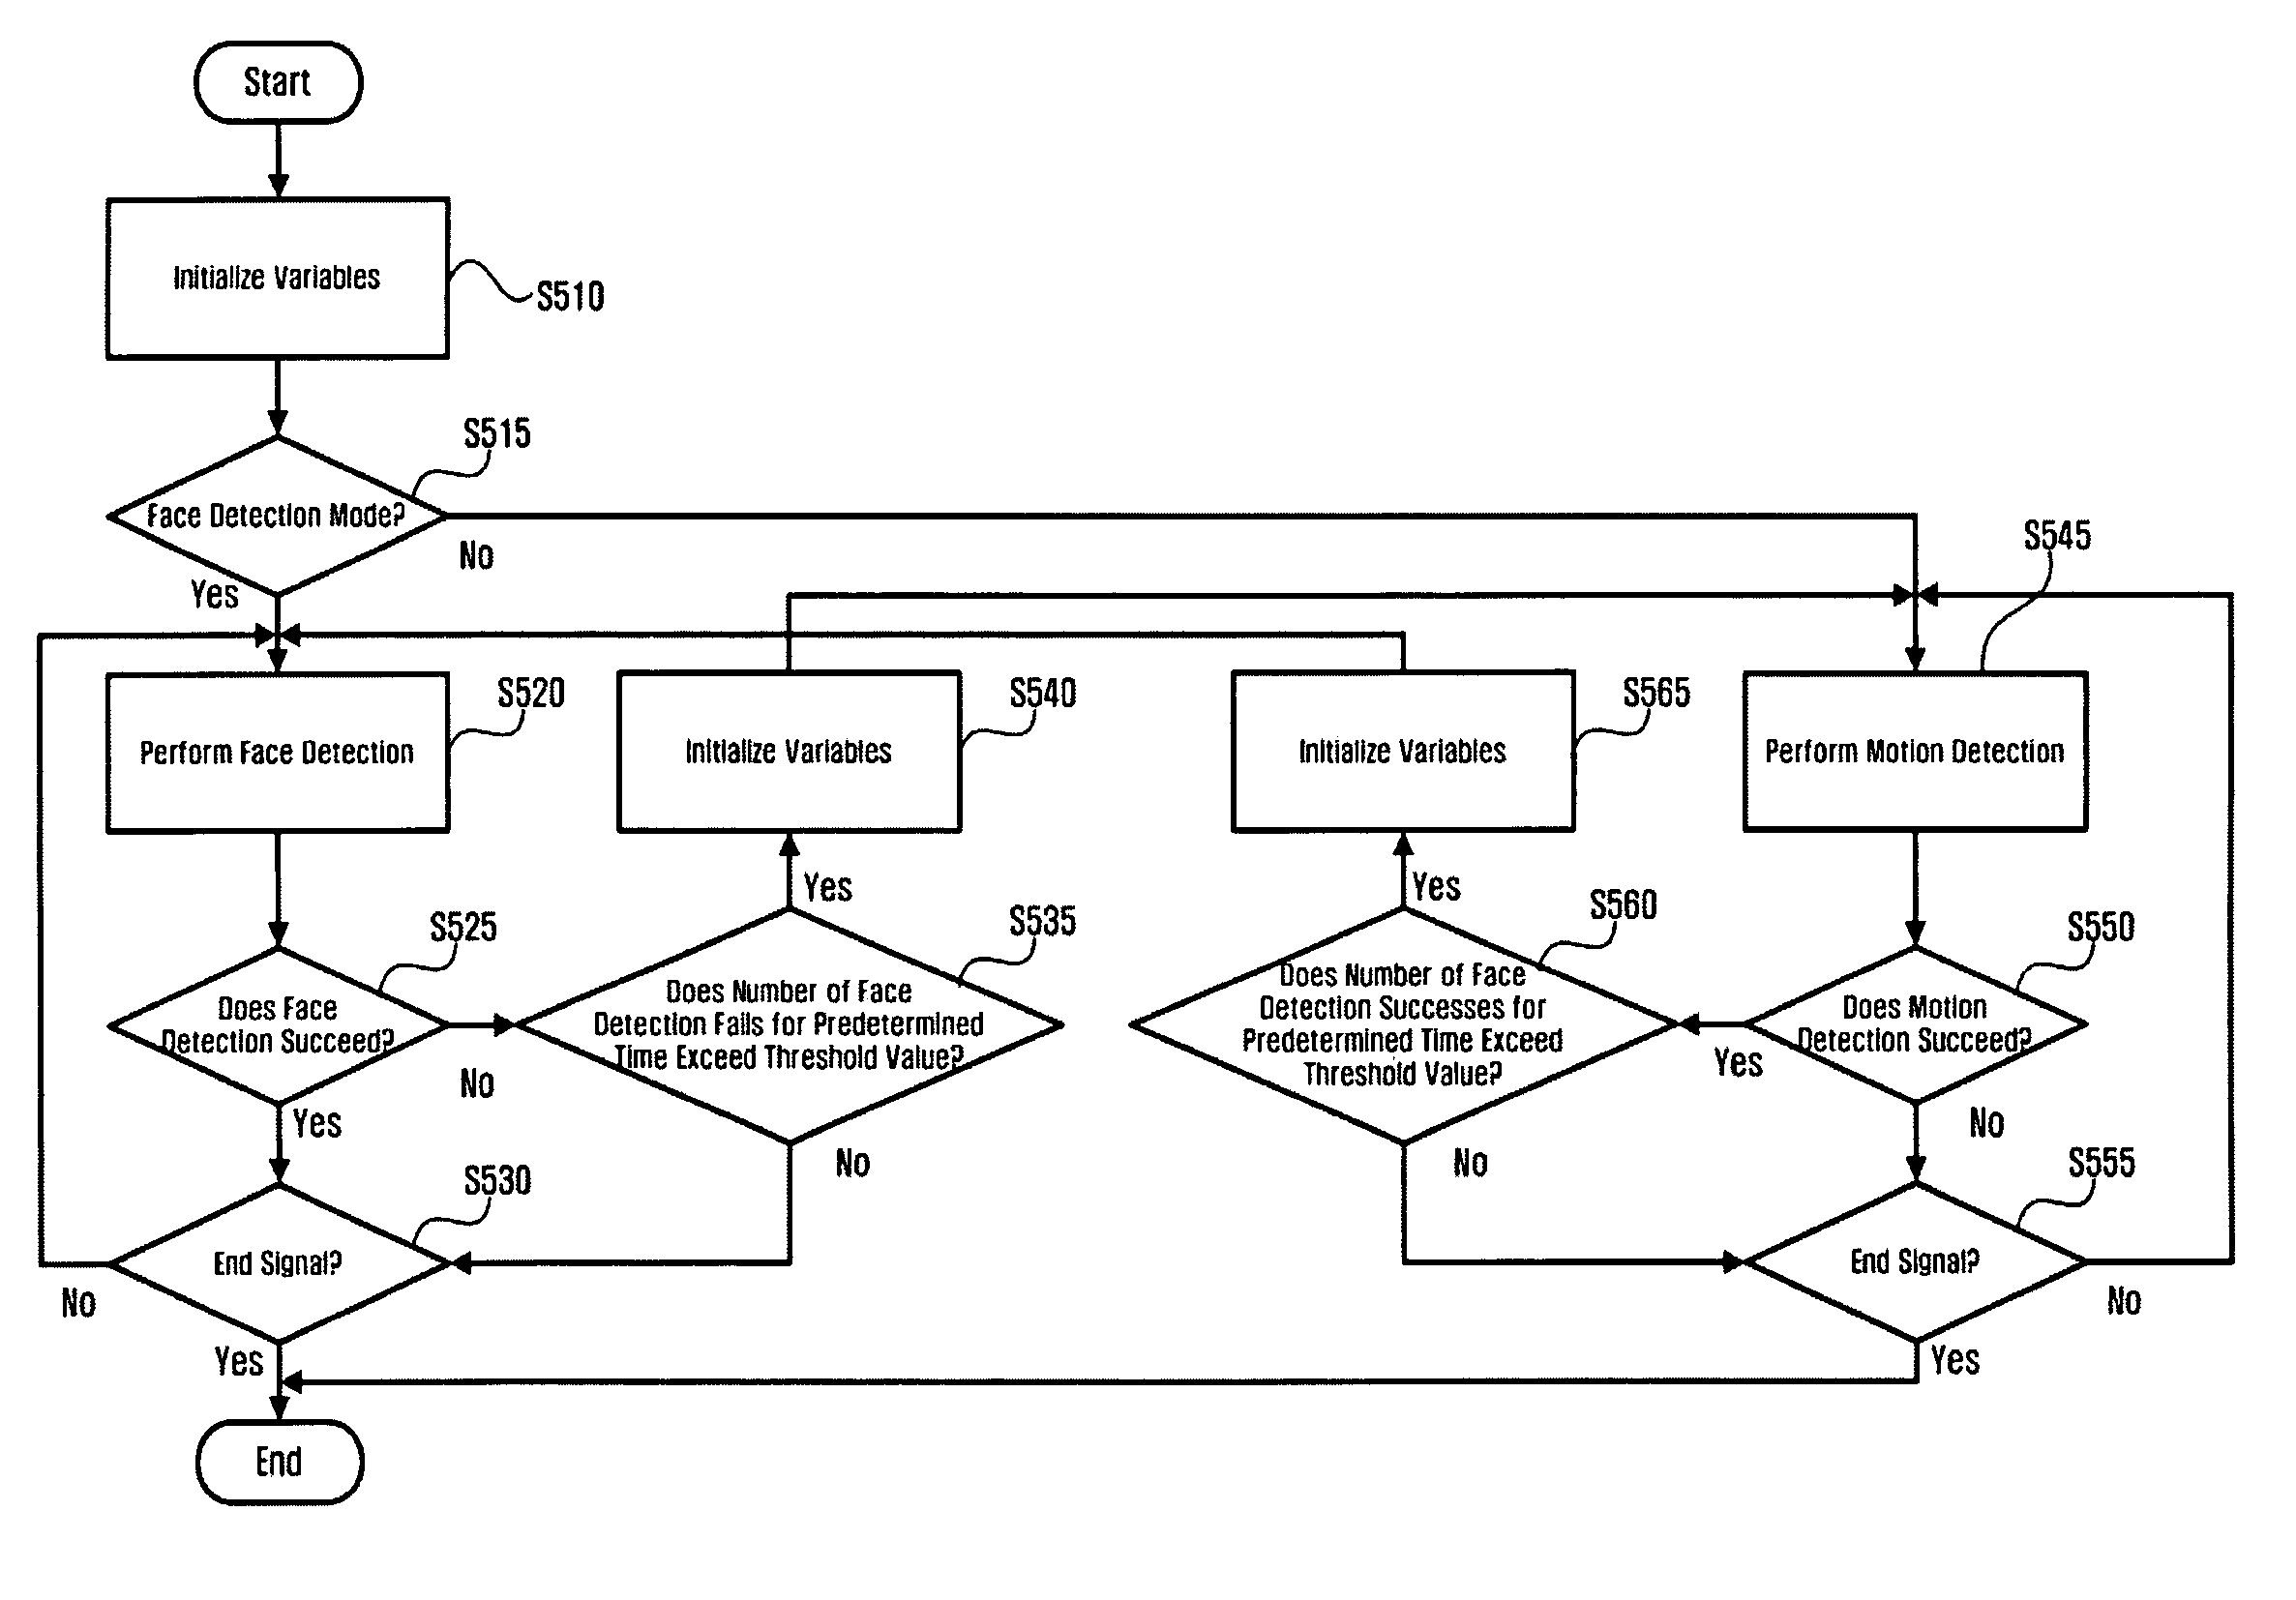 Broadcast receiving apparatus and method for providing multilateral video communication